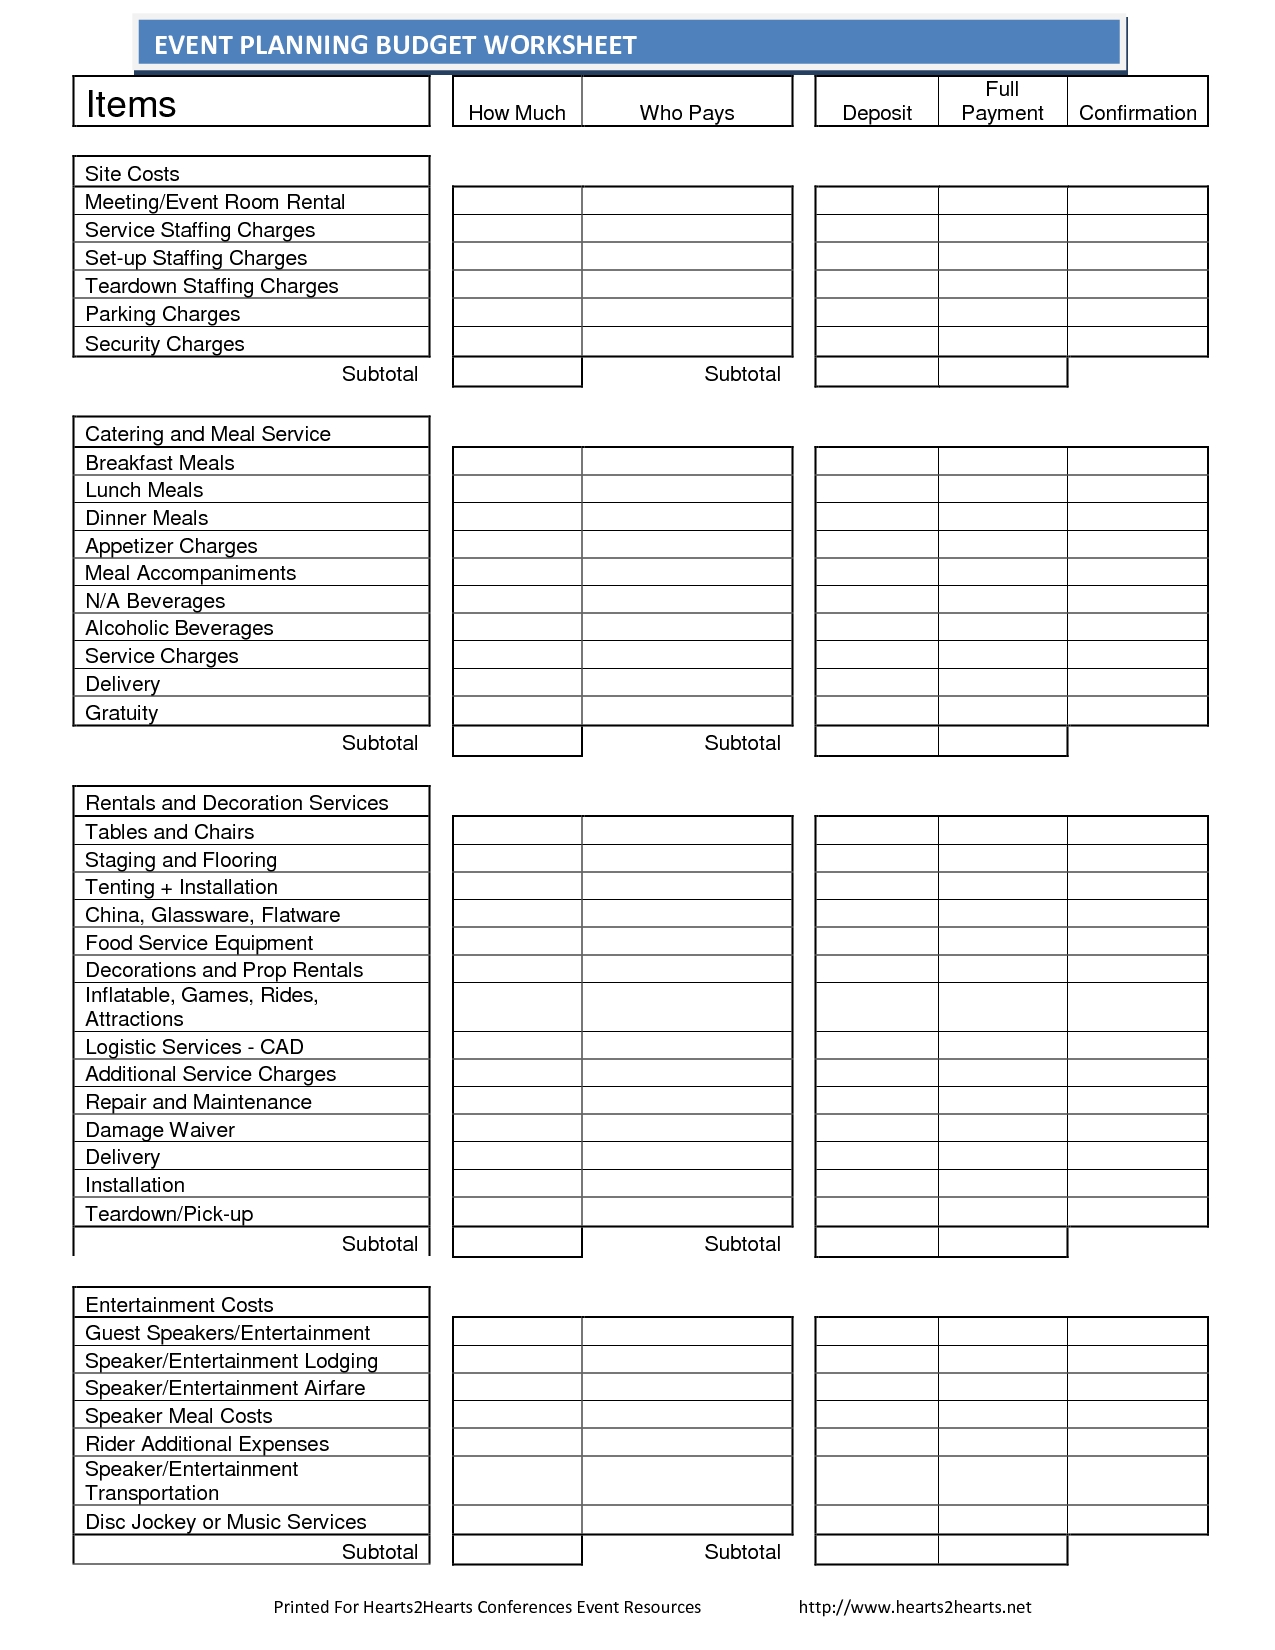 Budget Worksheet Template For Events - Google Search | Business intended for Special Event Budget Planning Worksheets